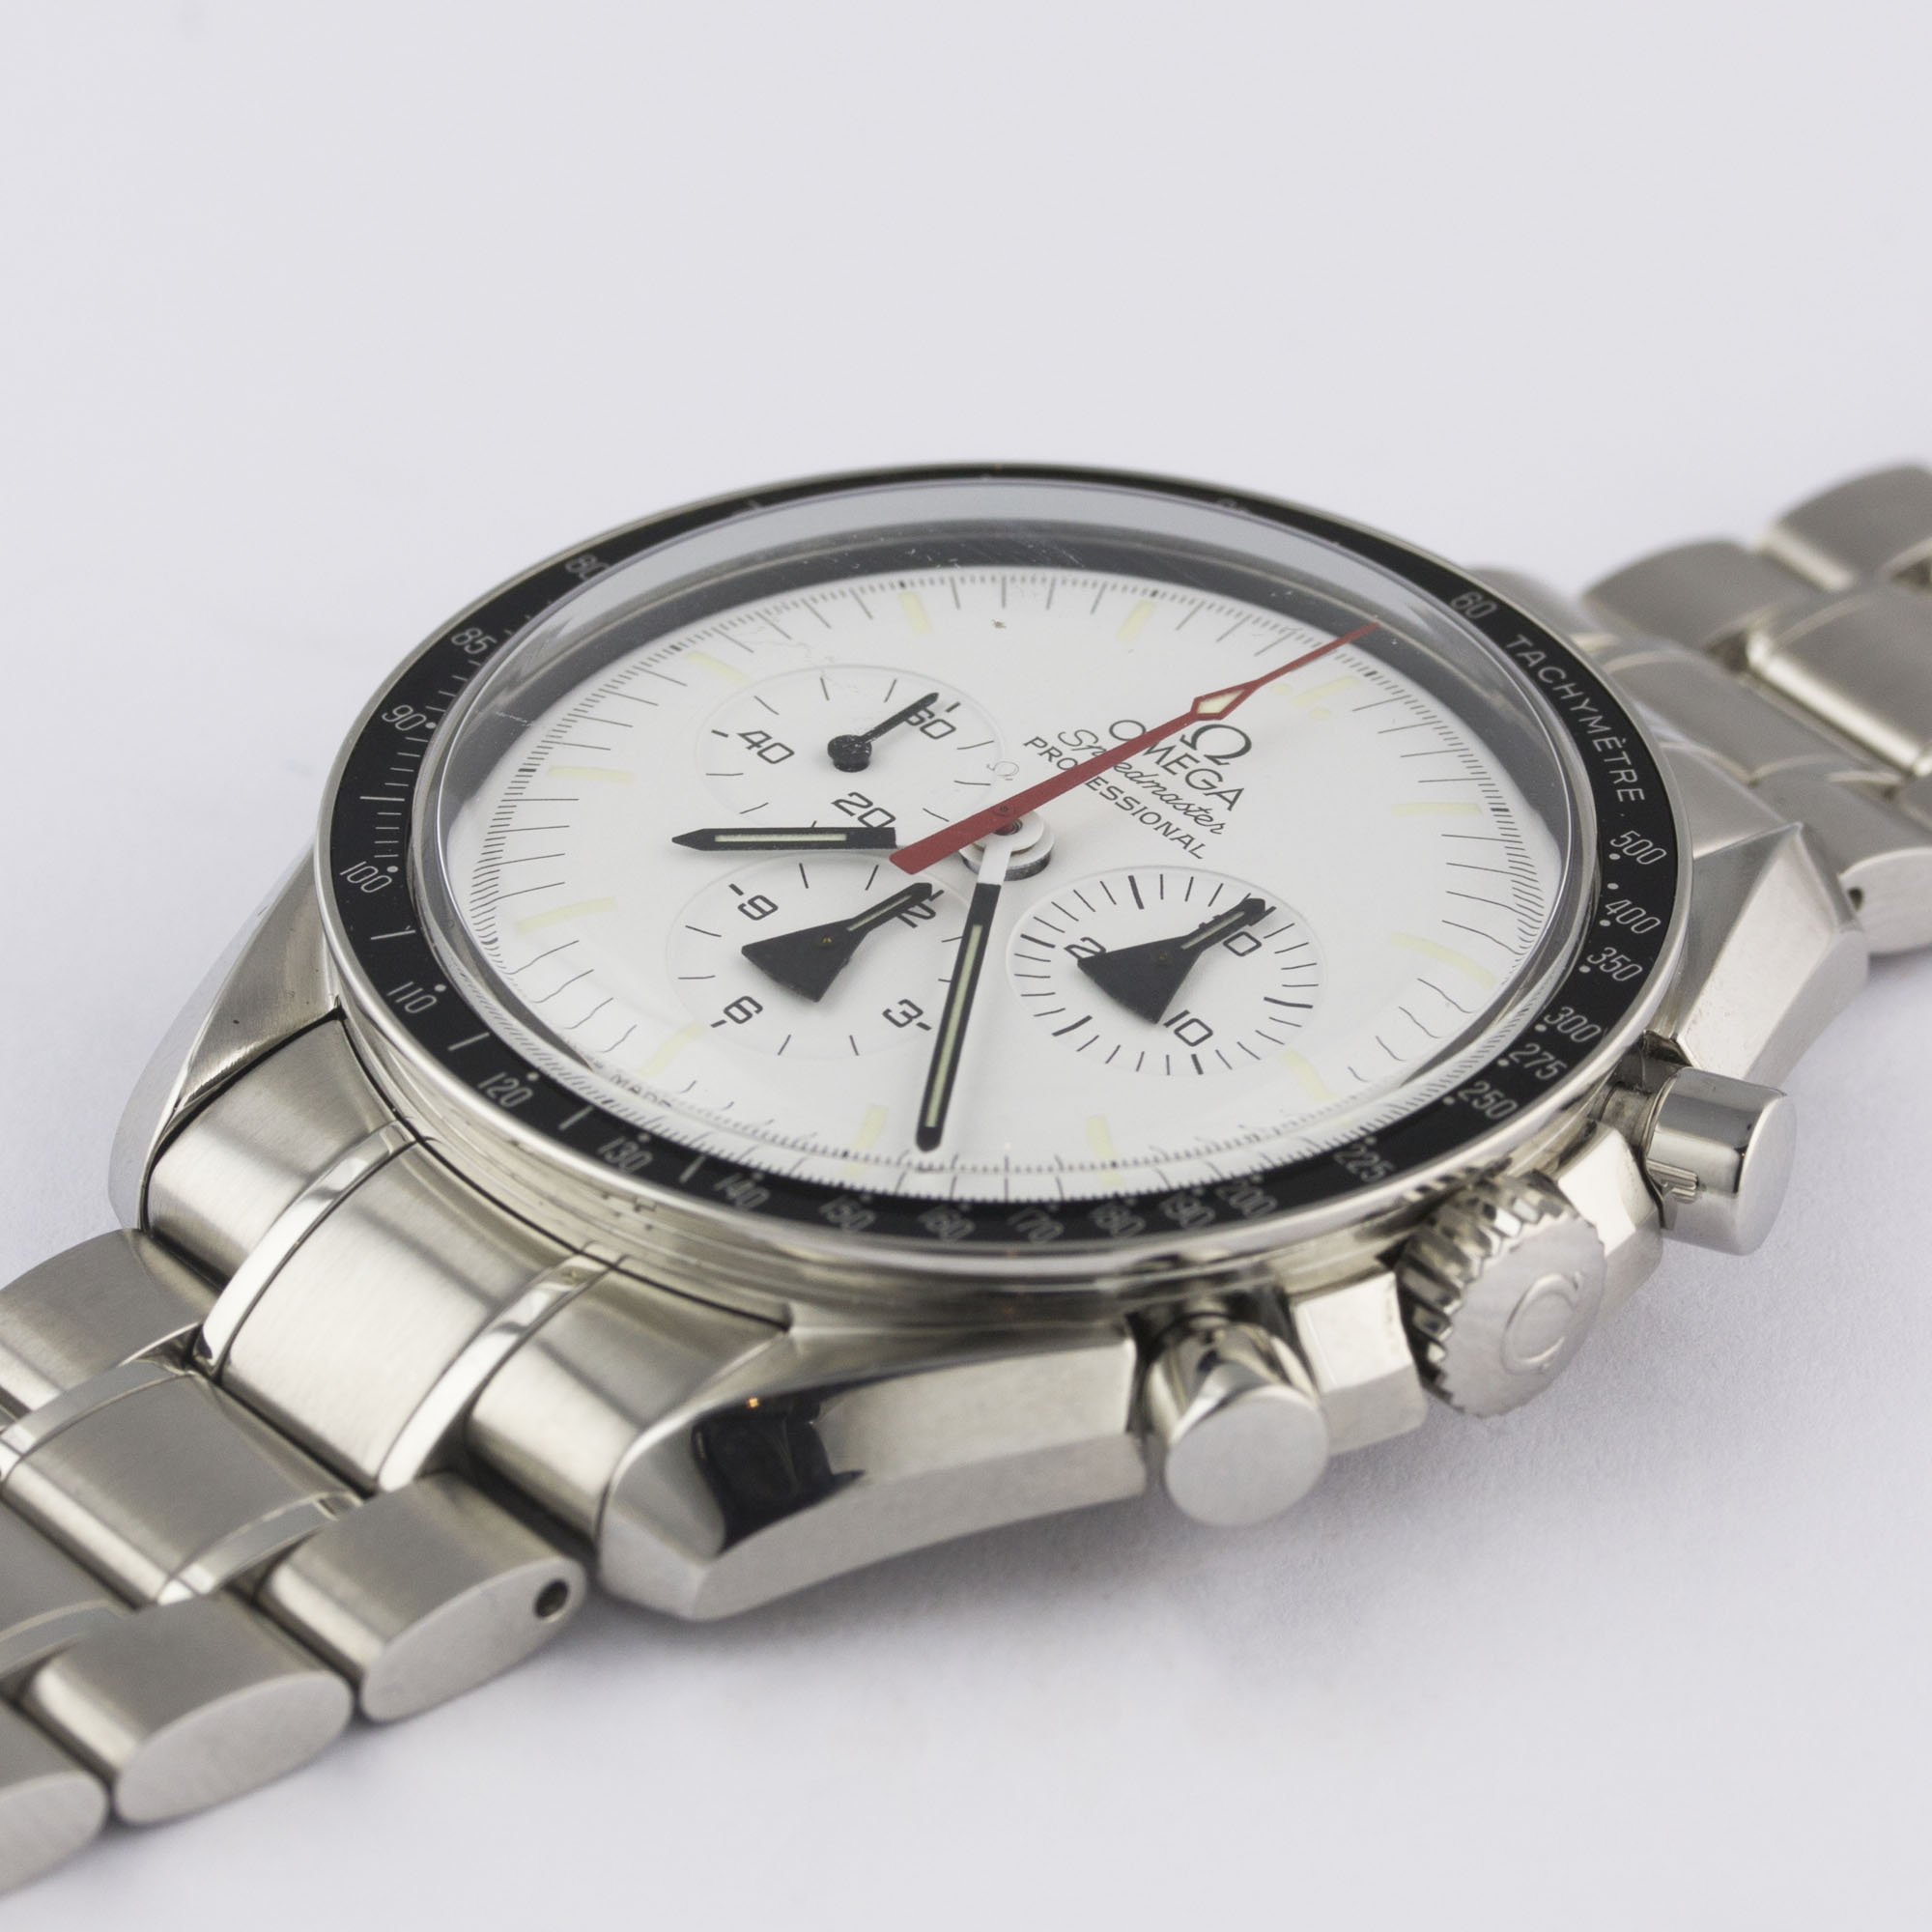 A RARE GENTLEMAN'S STAINLESS STEEL OMEGA SPEEDMASTER PROFESSIONAL "ALASKA PROJECT" CHRONOGRAPH - Image 4 of 10